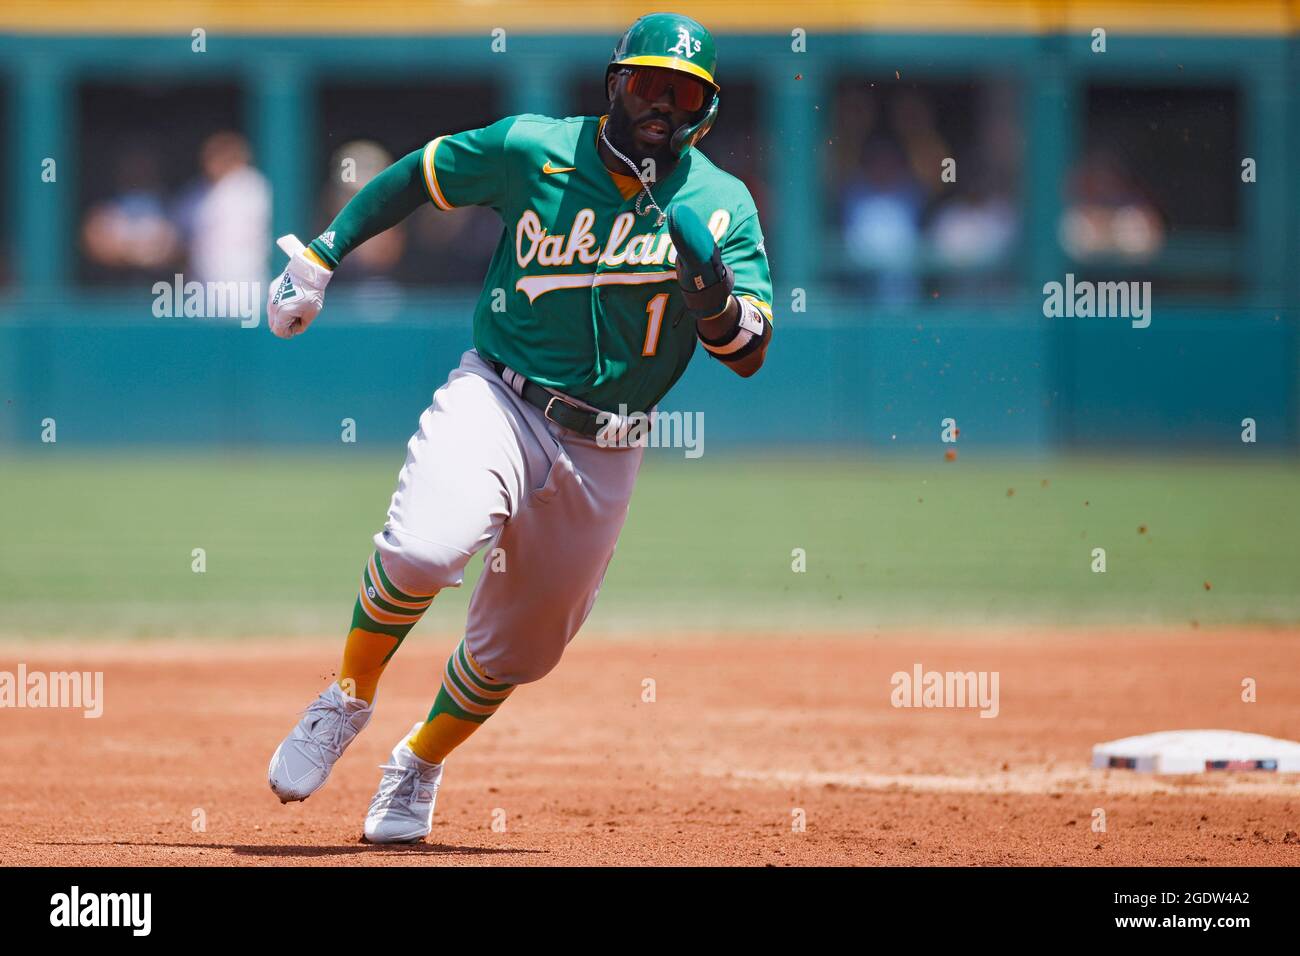 CLEVELAND, OH - AUGUST 12: Josh Harrison (1) of the Oakland A's runs the bases during a game against the Cleveland Indians at Progressive Field on Aug Stock Photo